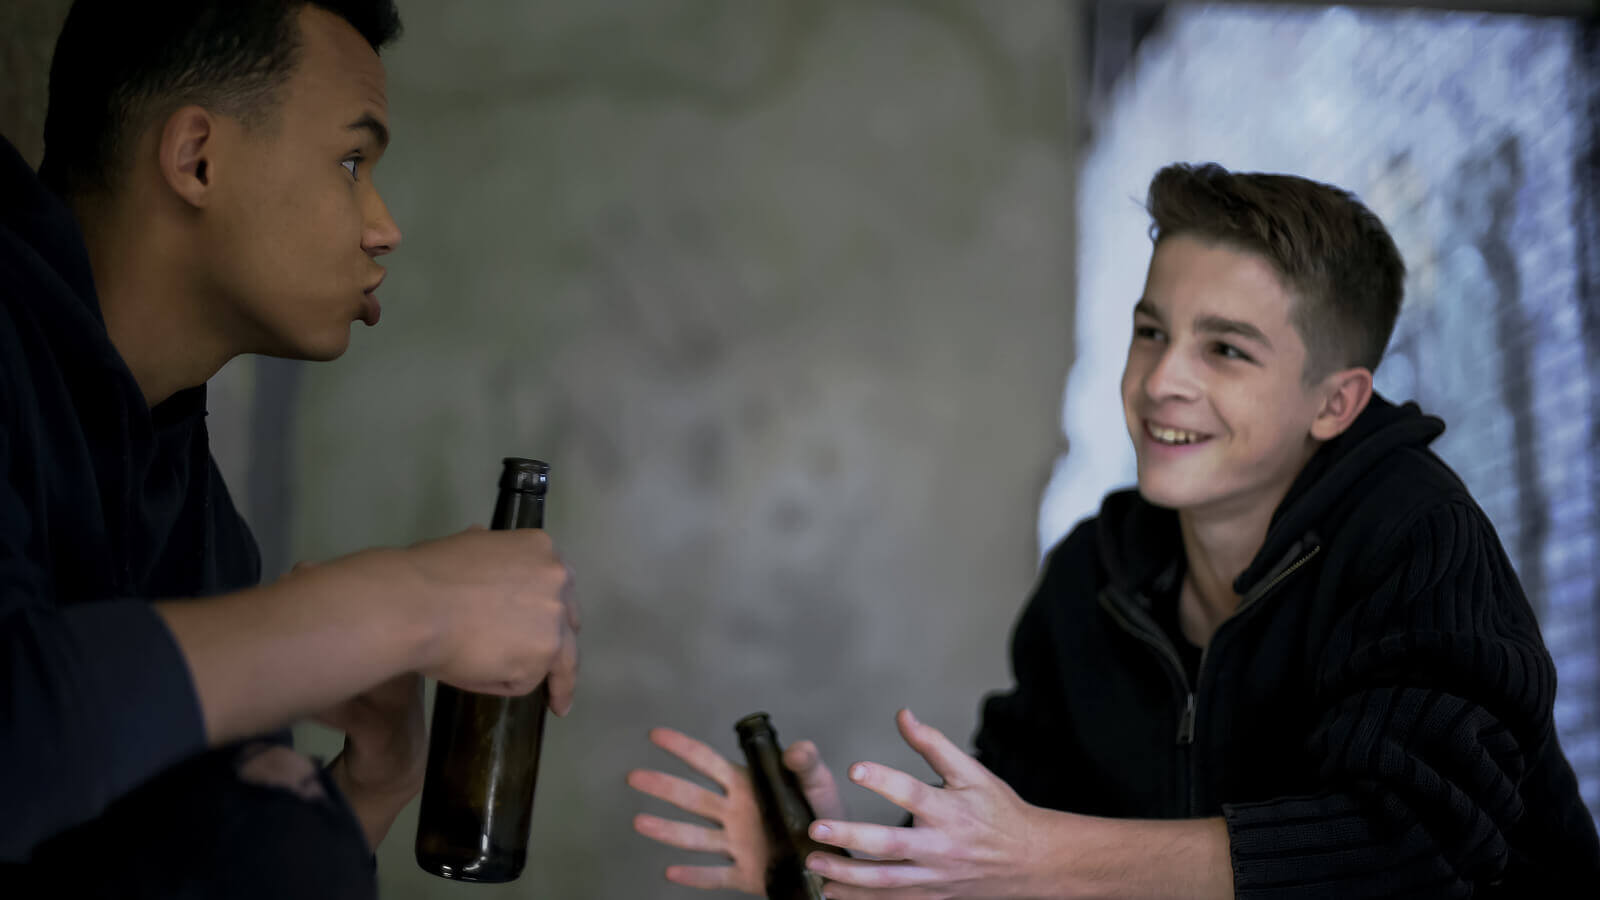 Alcohol Consumption in Teenagers: What You Should Know